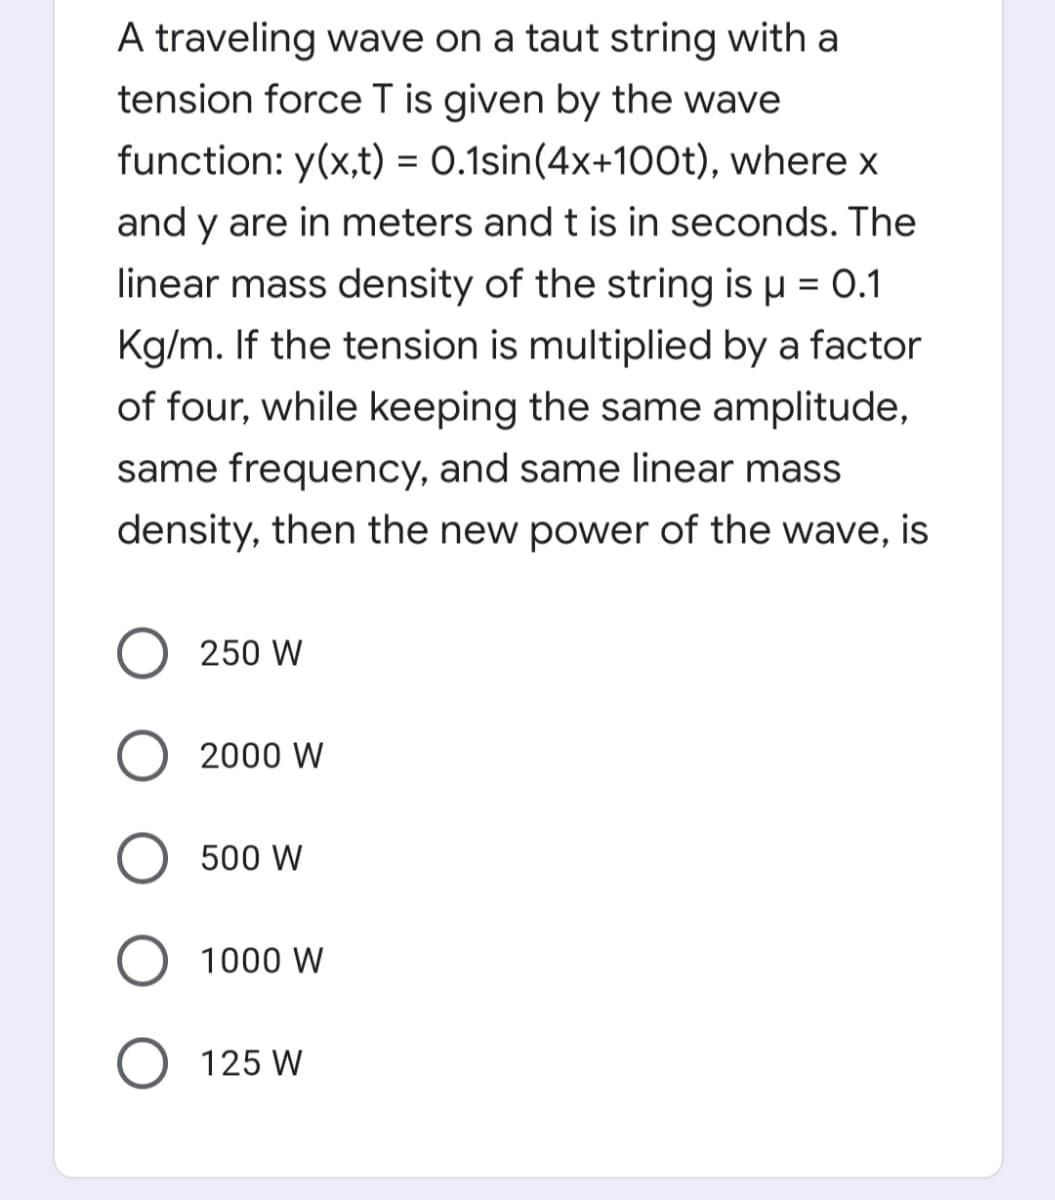 A traveling wave on a taut string with a
tension force T is given by the wave
function: y(x,t) = 0.1sin(4x+10o0t), where x
and y are in meters and t is in seconds. The
linear mass density of the string is µ = 0.1
%3D
Kg/m. If the tension is multiplied by a factor
of four, while keeping the same amplitude,
same frequency, and same linear mass
density, then the new power of the wave, is
250 W
2000 W
500 W
1000 W
O 125 W
